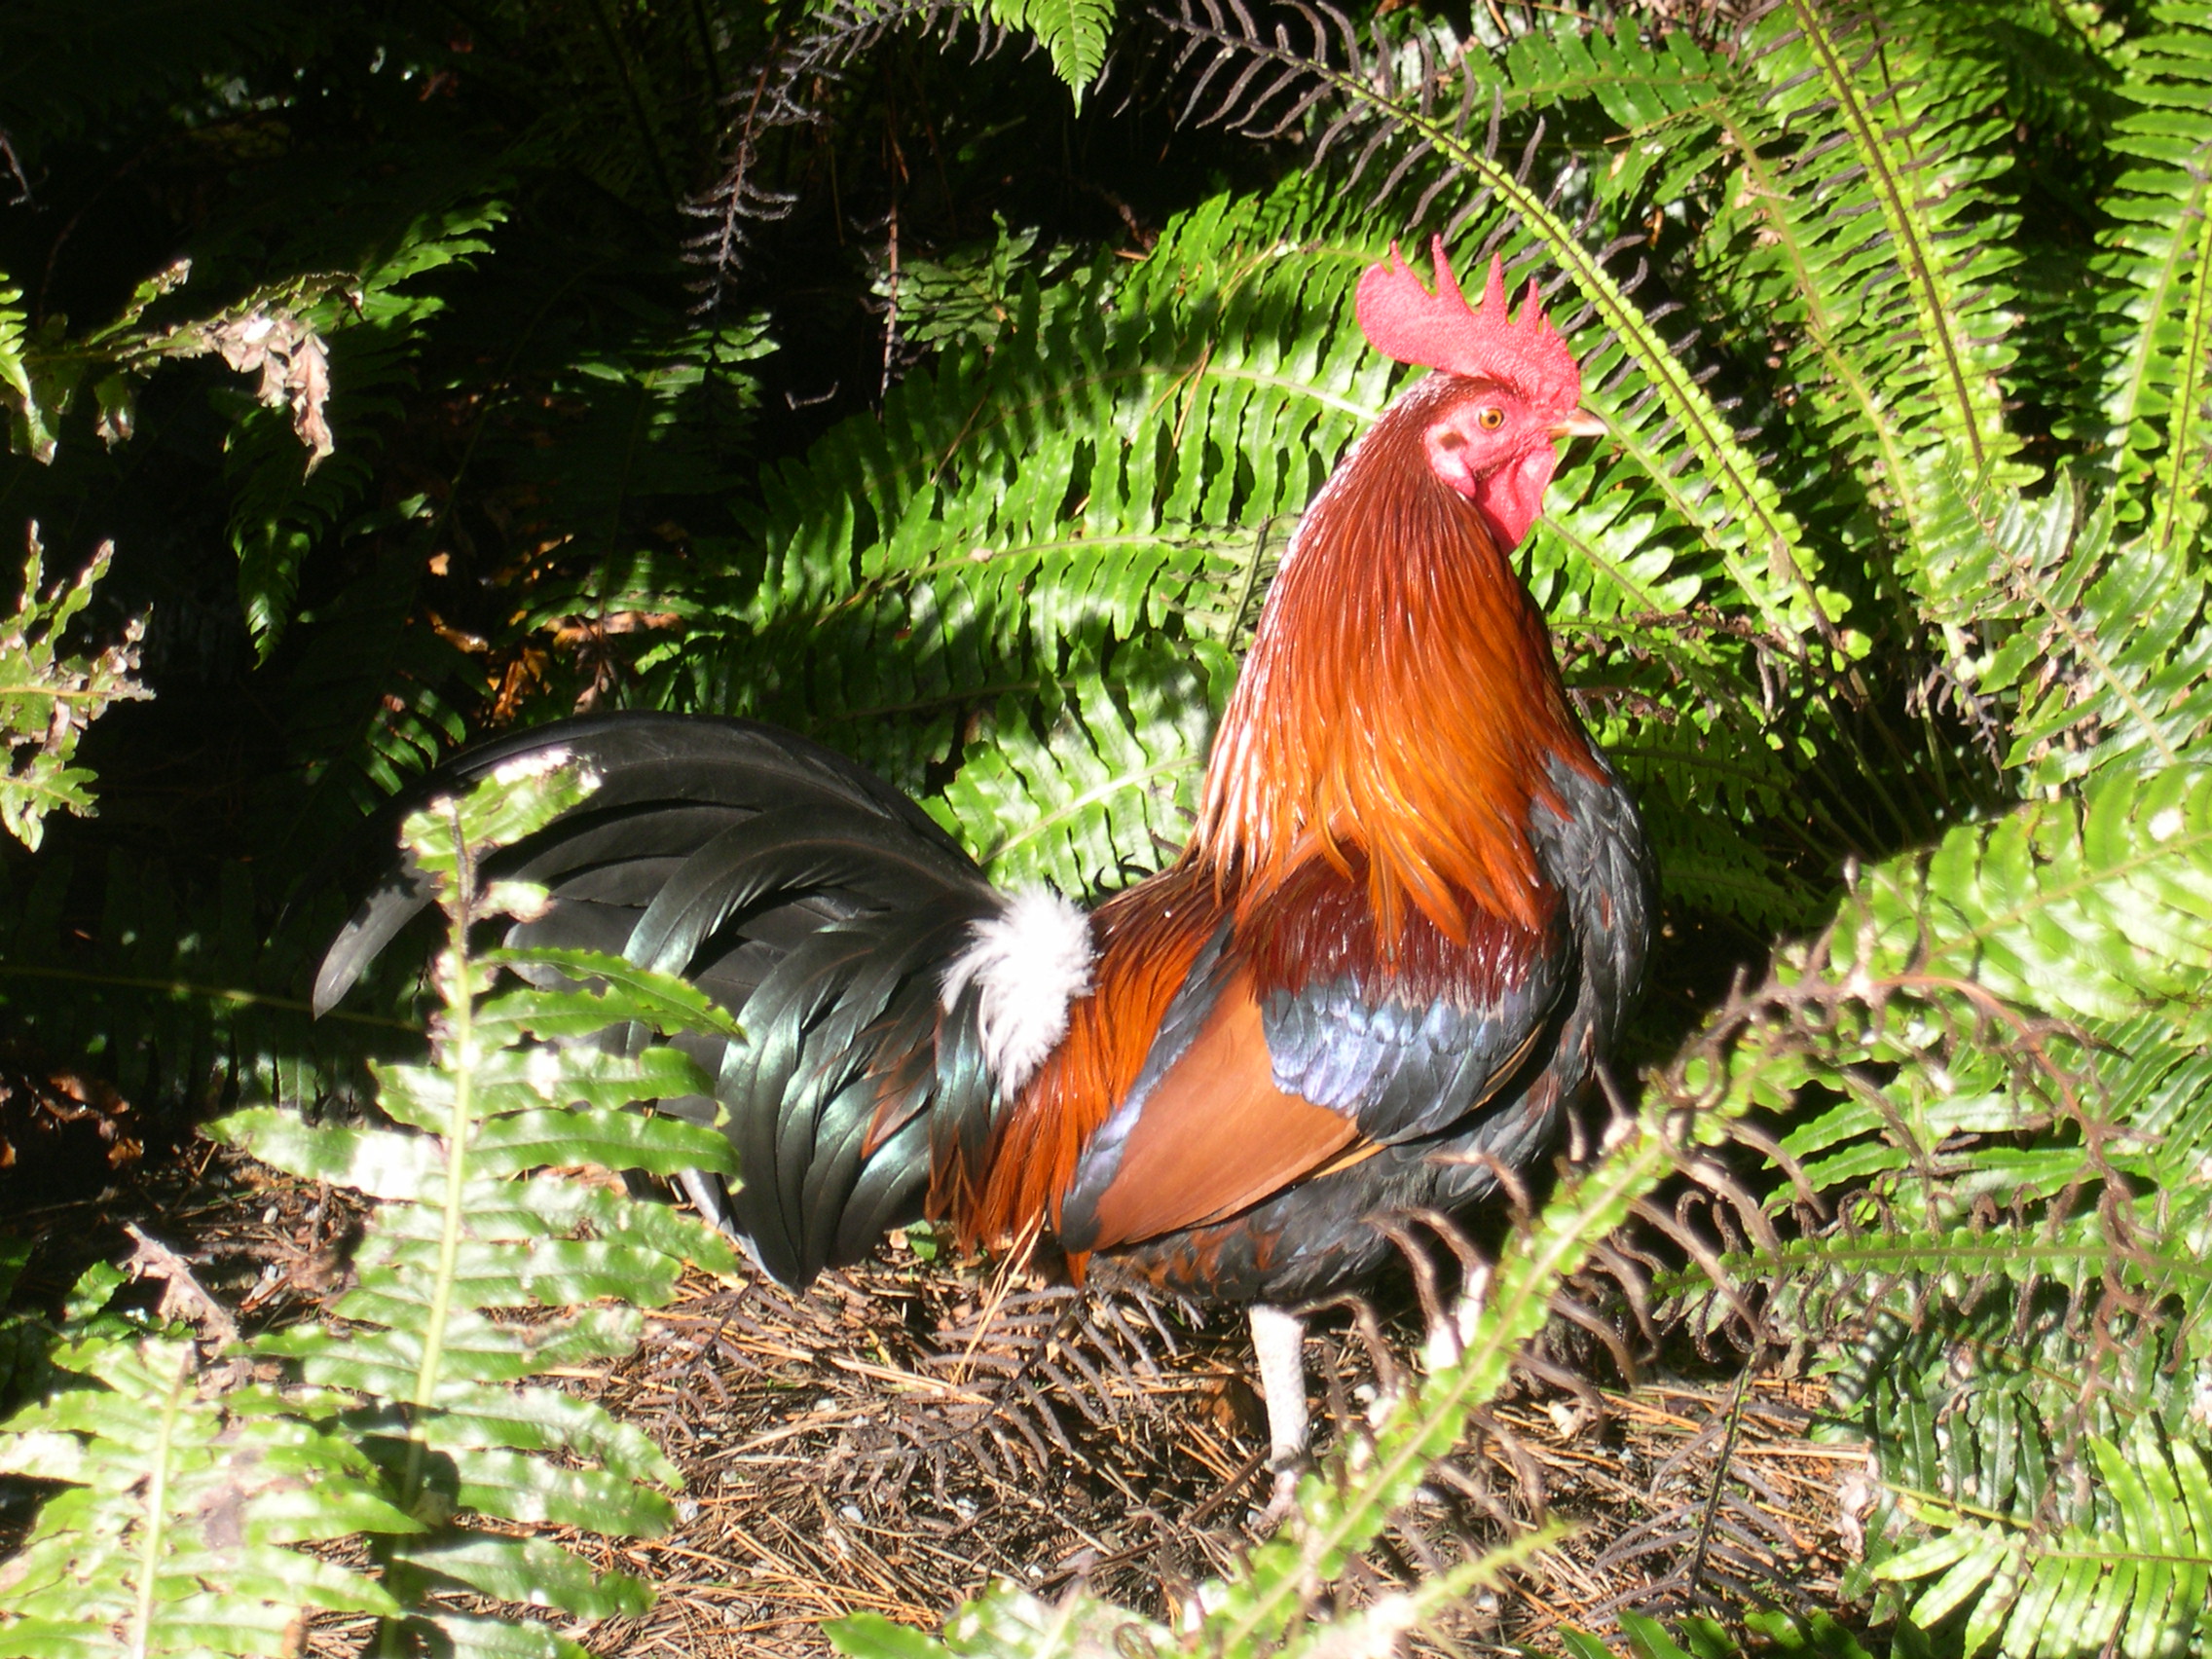 http://www.turbophoto.com/Free-Stock-Images/Images/Rooster.jpg